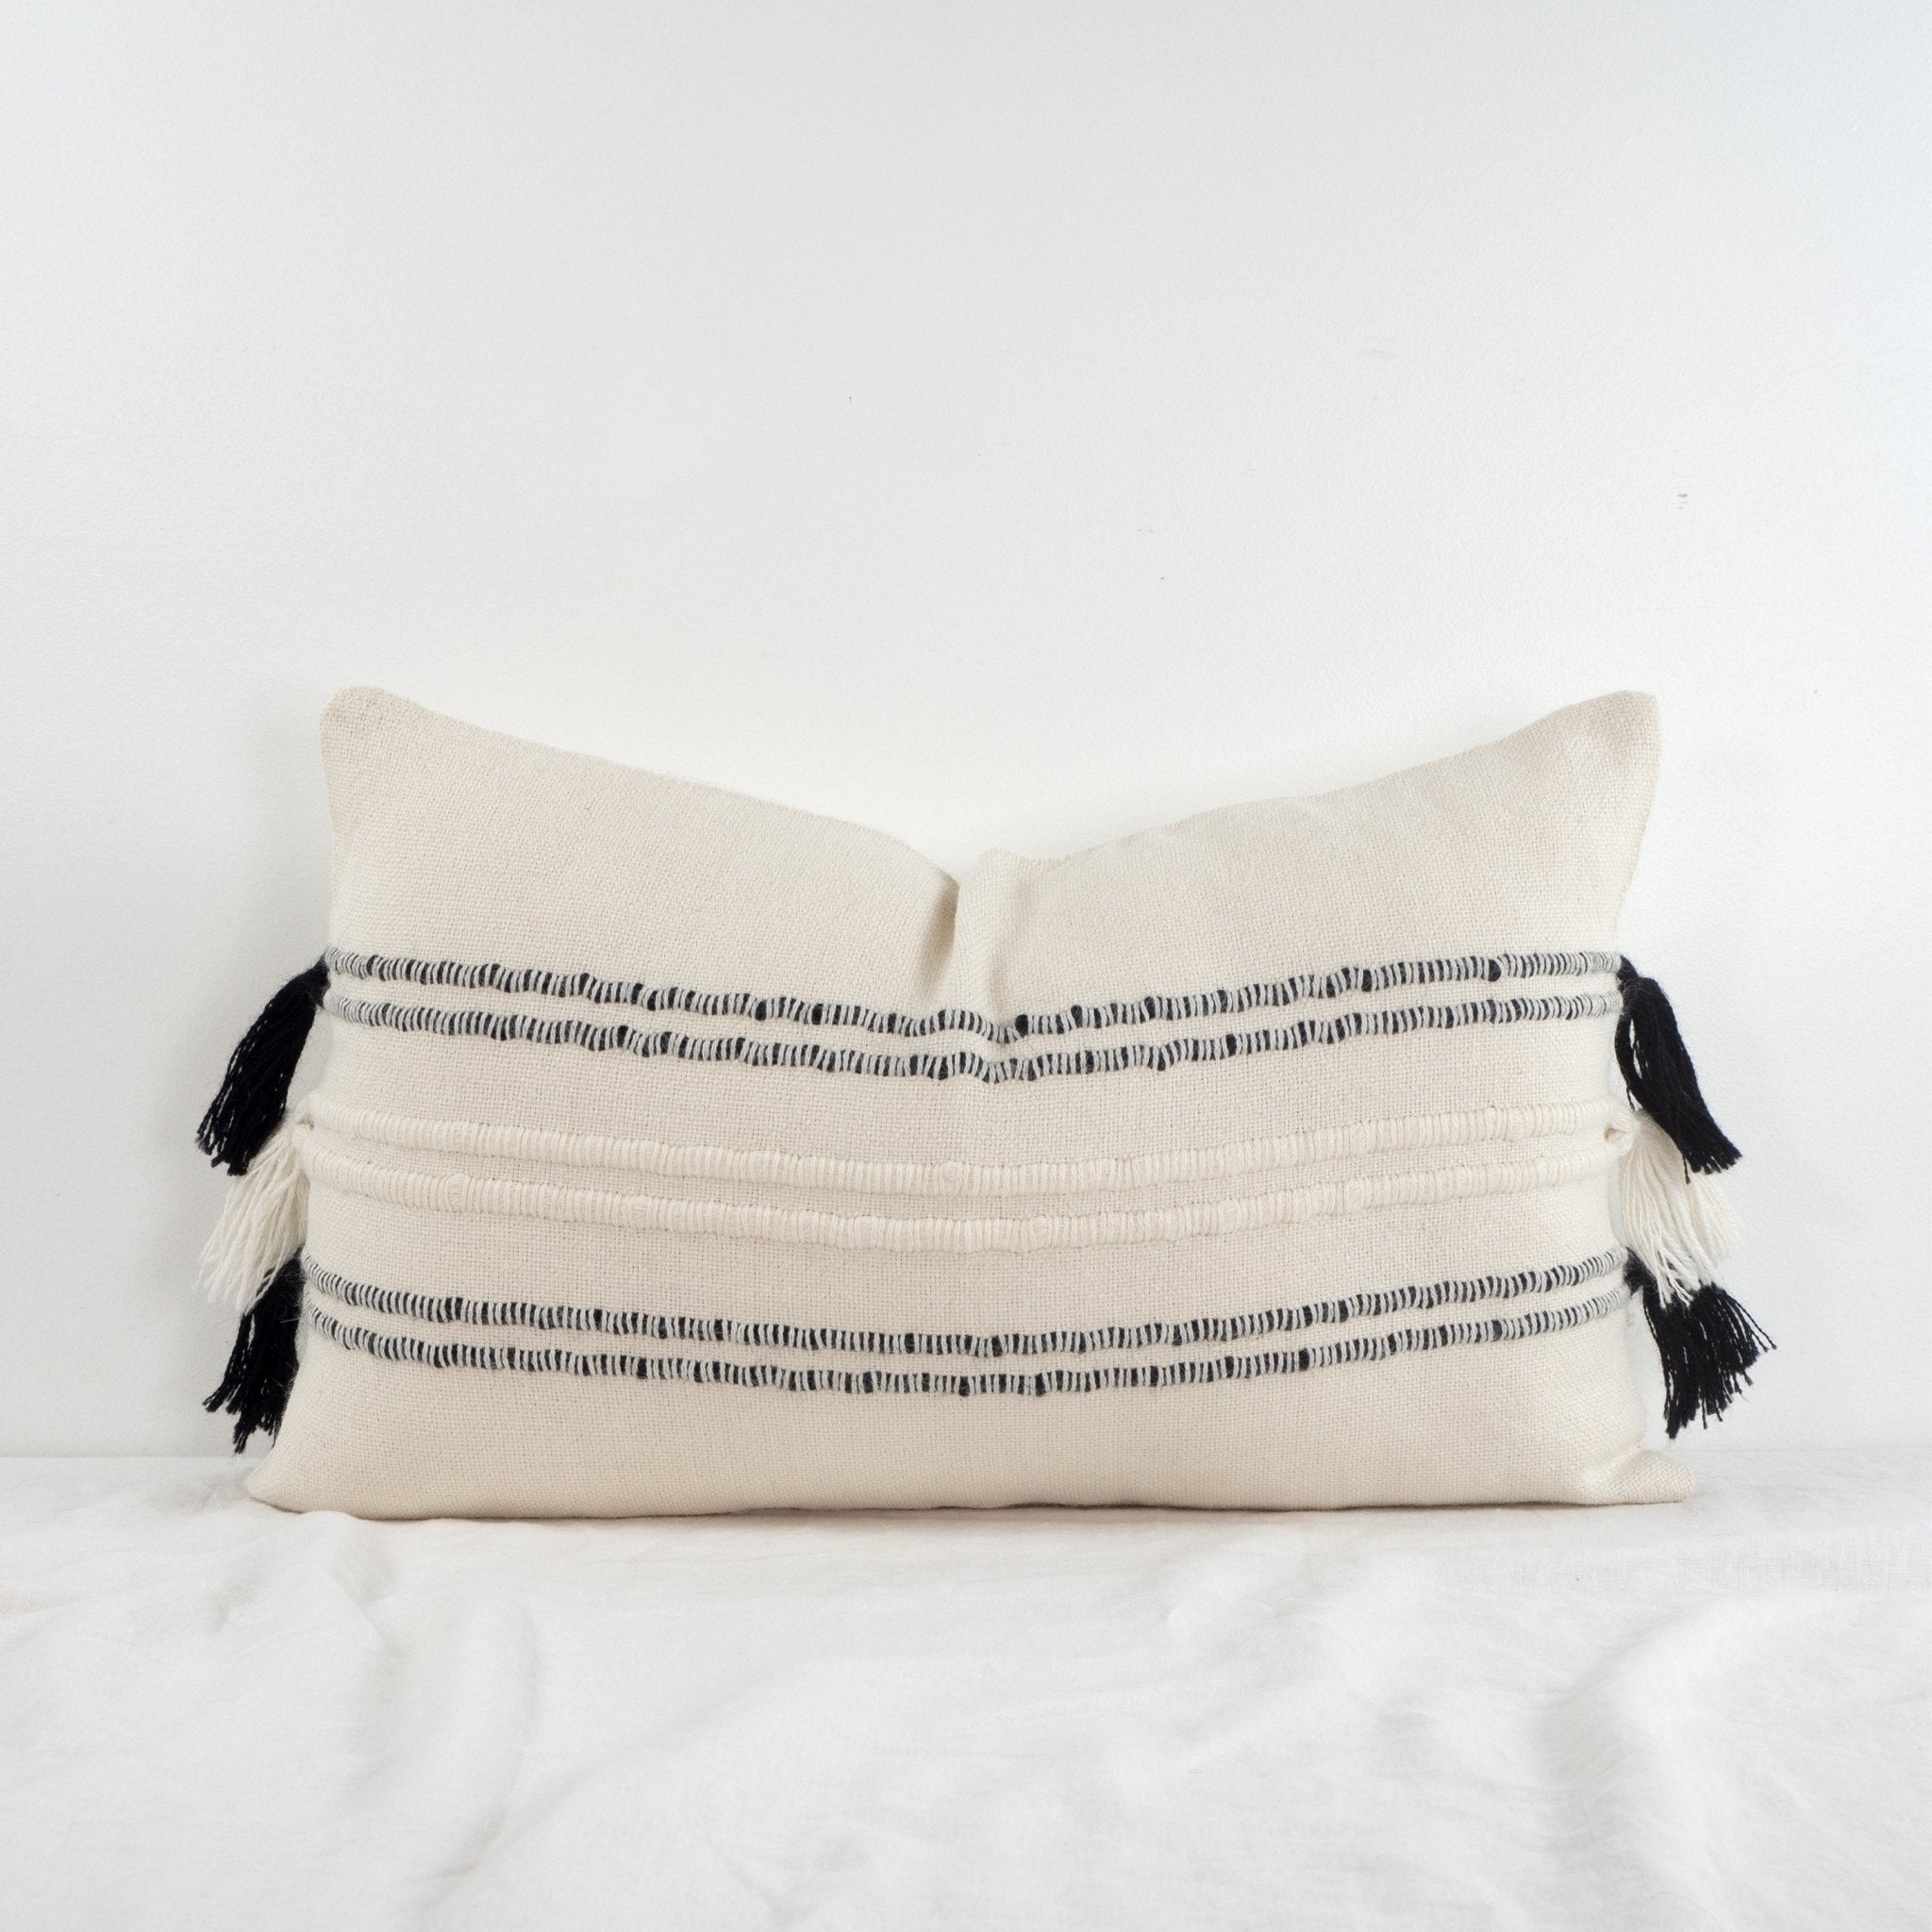 Handwoven white and black baby alpaca lumbar cushion from Peru on a table